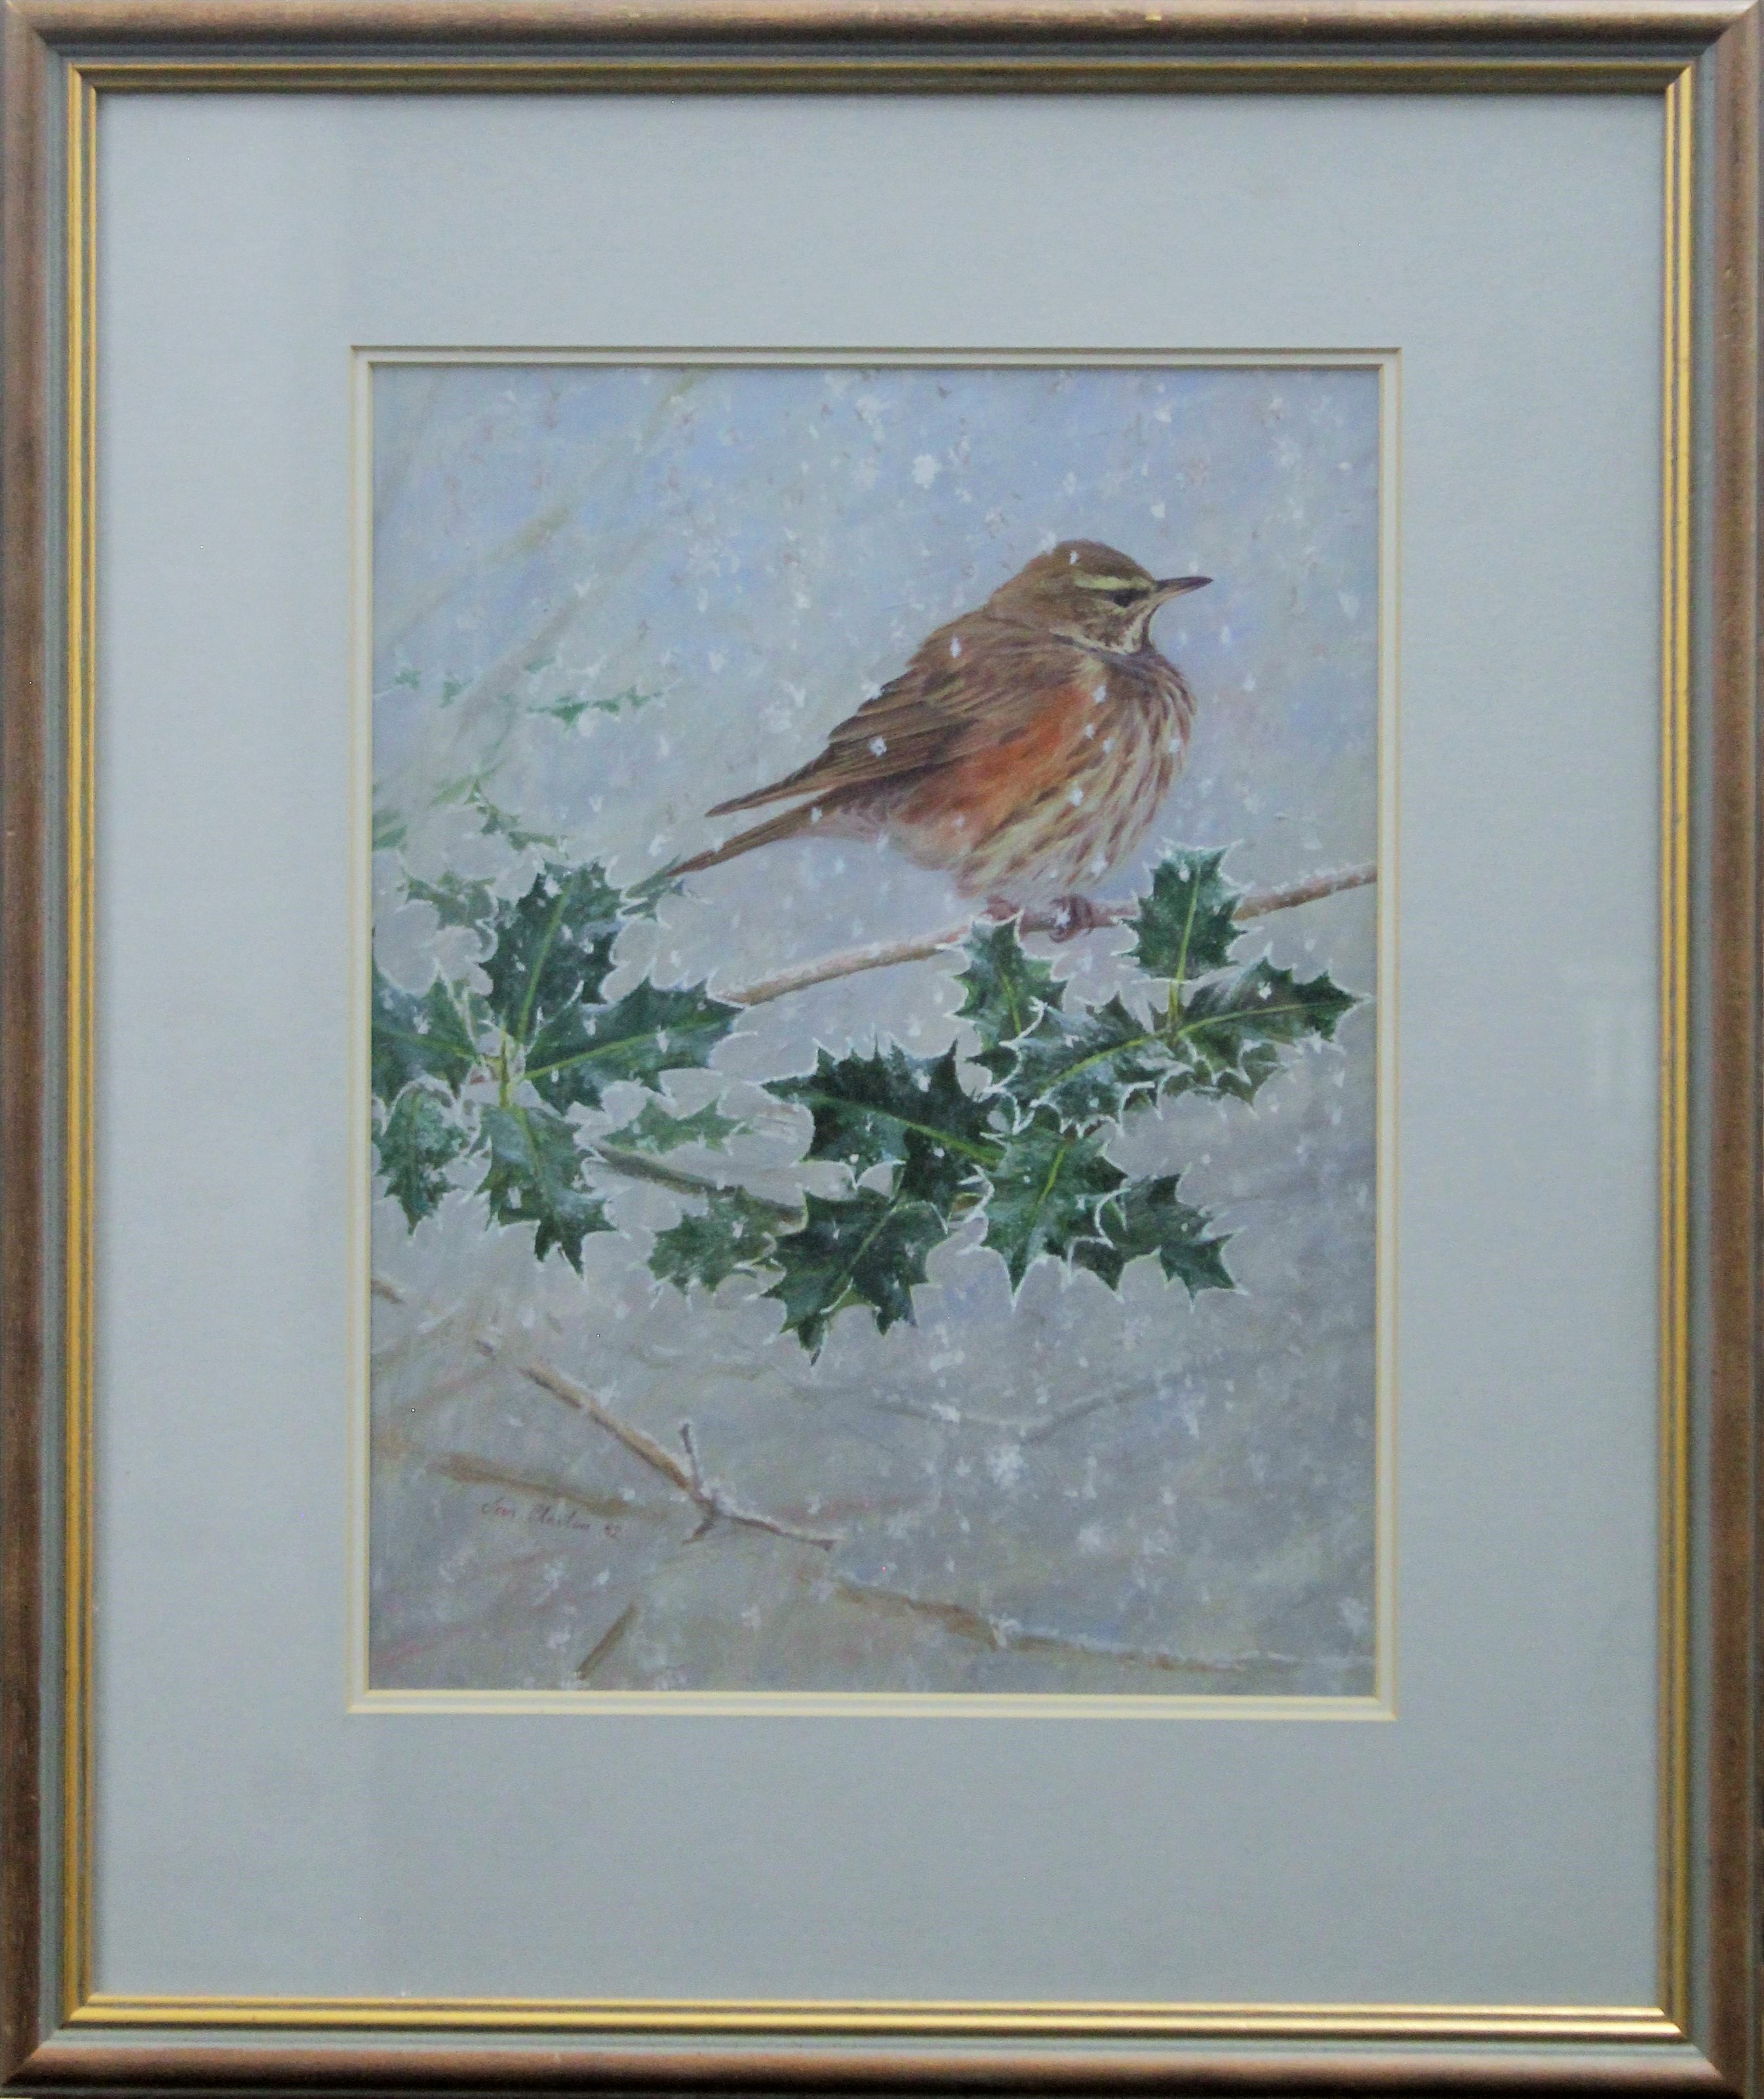 CLAXTON, IAN (20th century) British (AR), Redwing and Holly, pastel, signed and dated '92, - Image 2 of 3